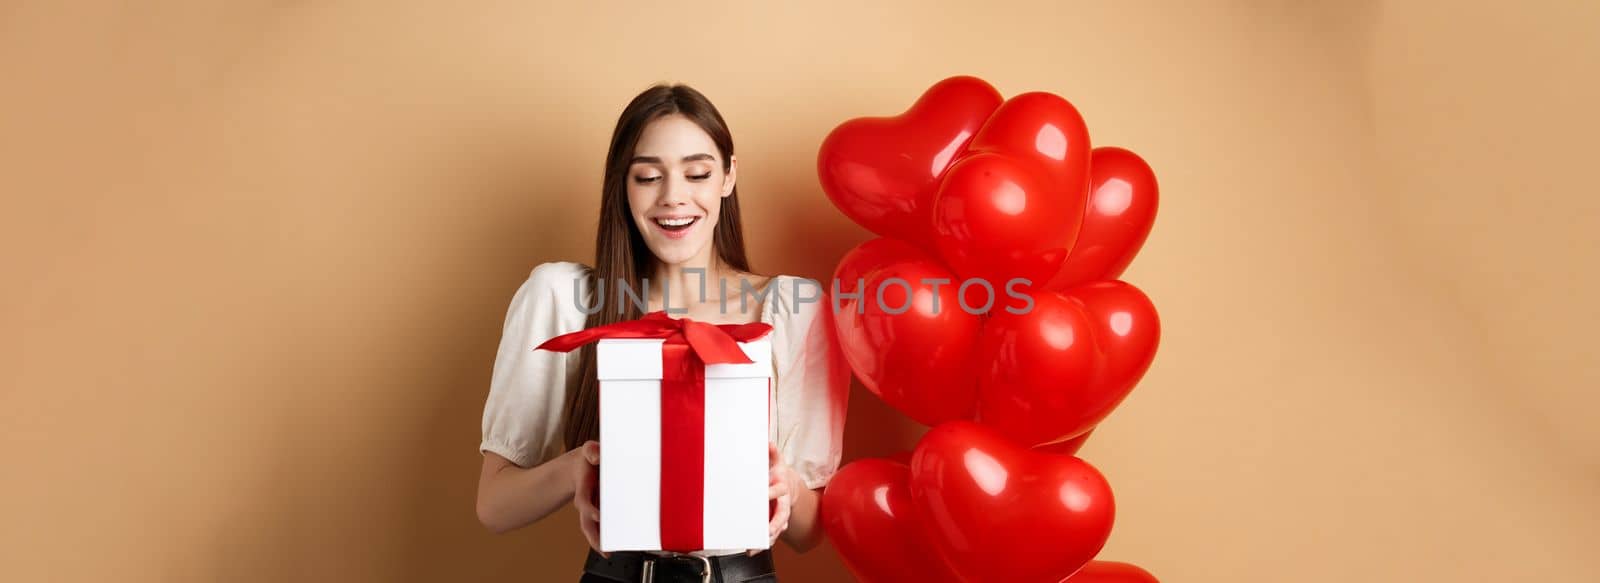 Happy woman open Valentines day gift, smiling excited and looking at present box, standing near red heart balloons on beige background.